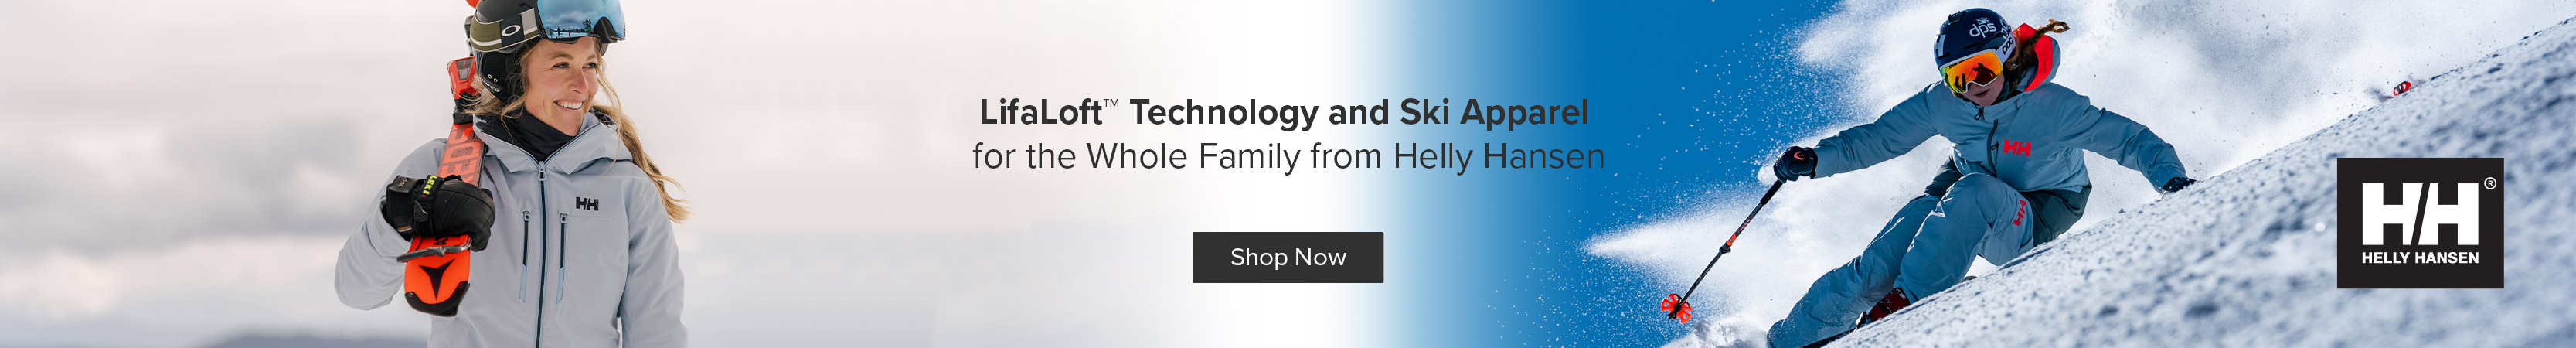 Shop LifaLoft™ Technology and Ski Apparel for the Whole Family from Helly Hansen